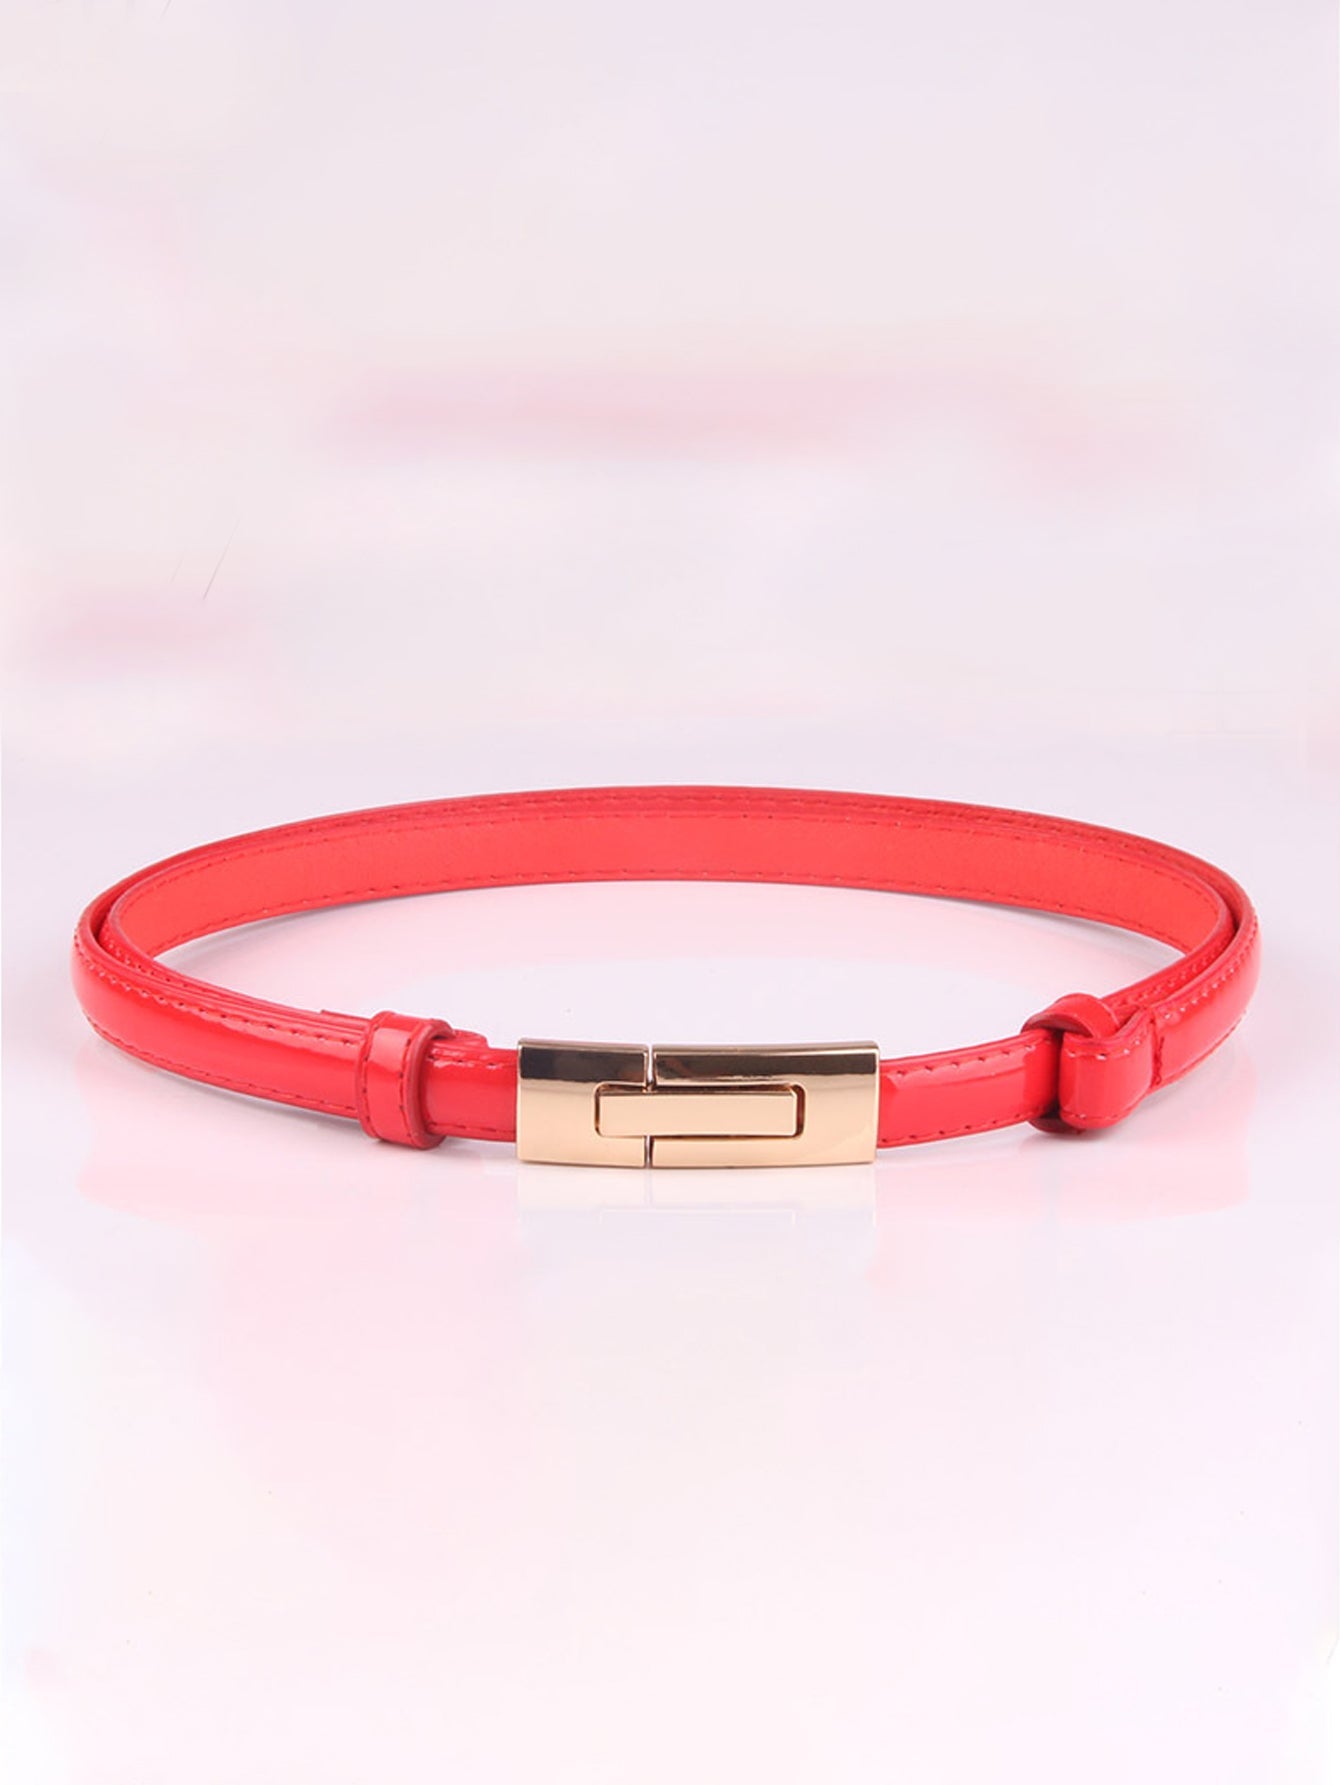 Patent leather adjustable pair buckle belt  - Red - FD ⚡